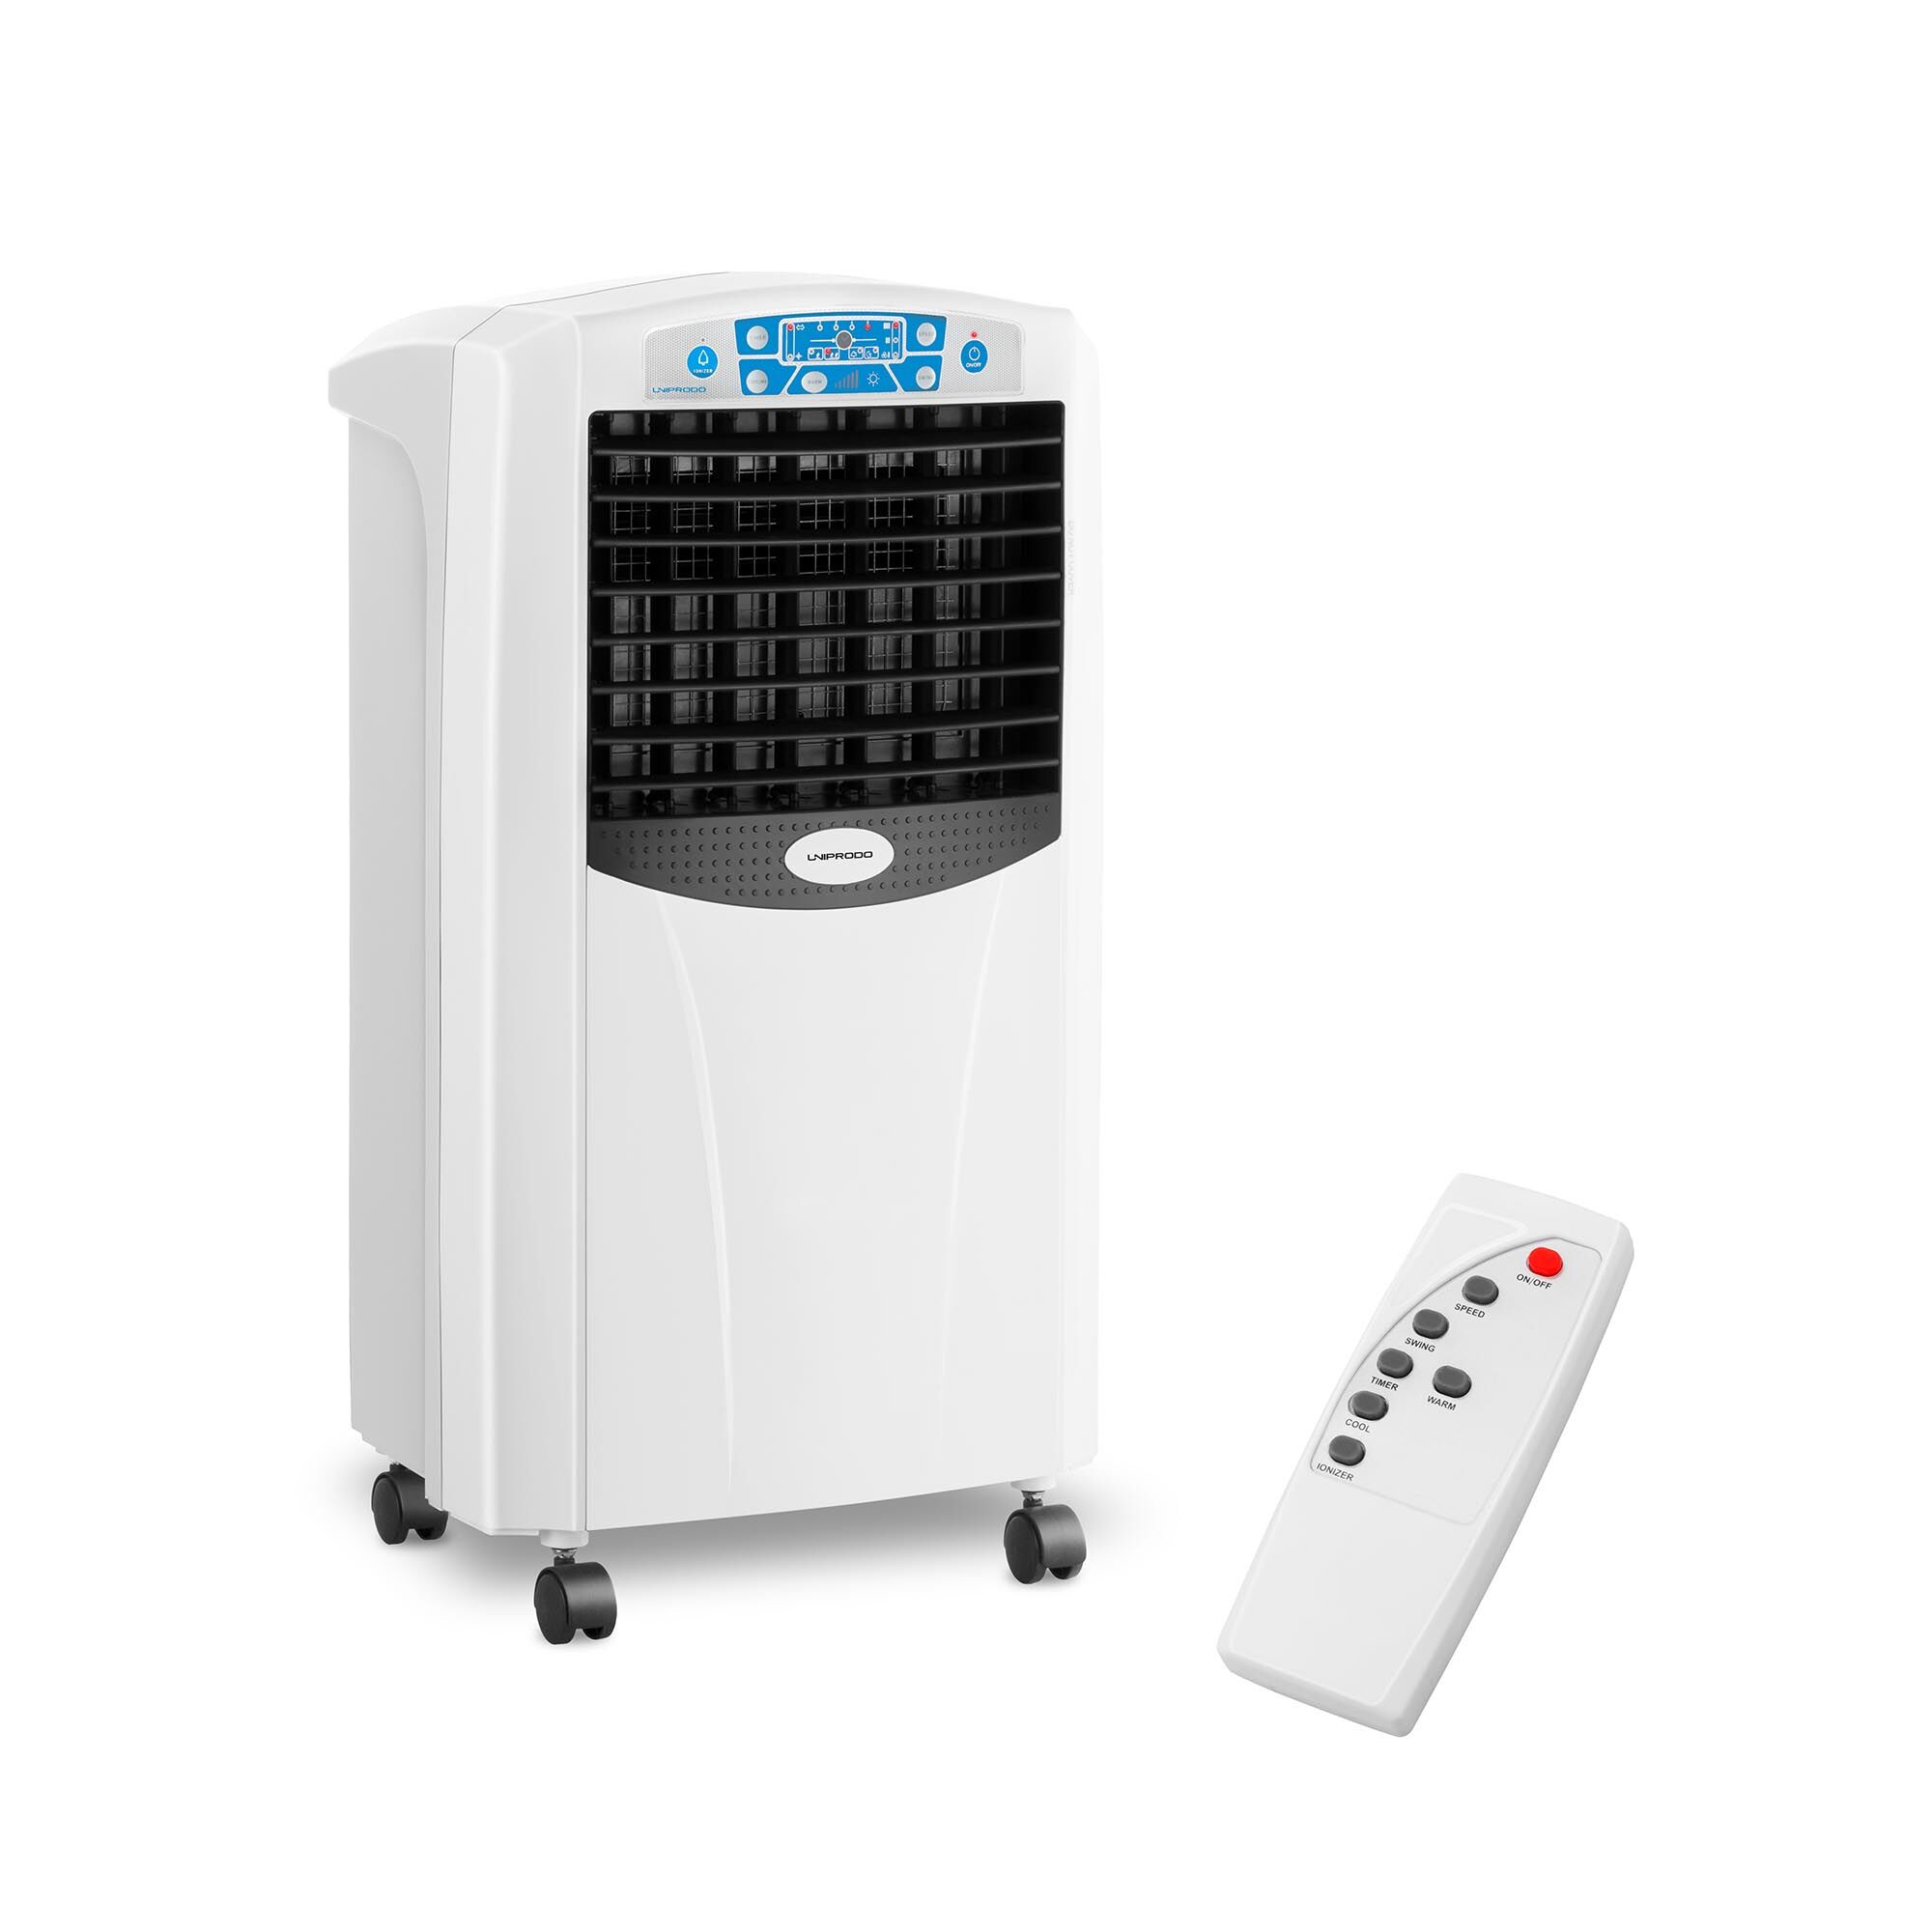 Uniprodo Water Air Cooler with Heating Function - 5-in-1 - 6 L water tank UNI_COOLER_03